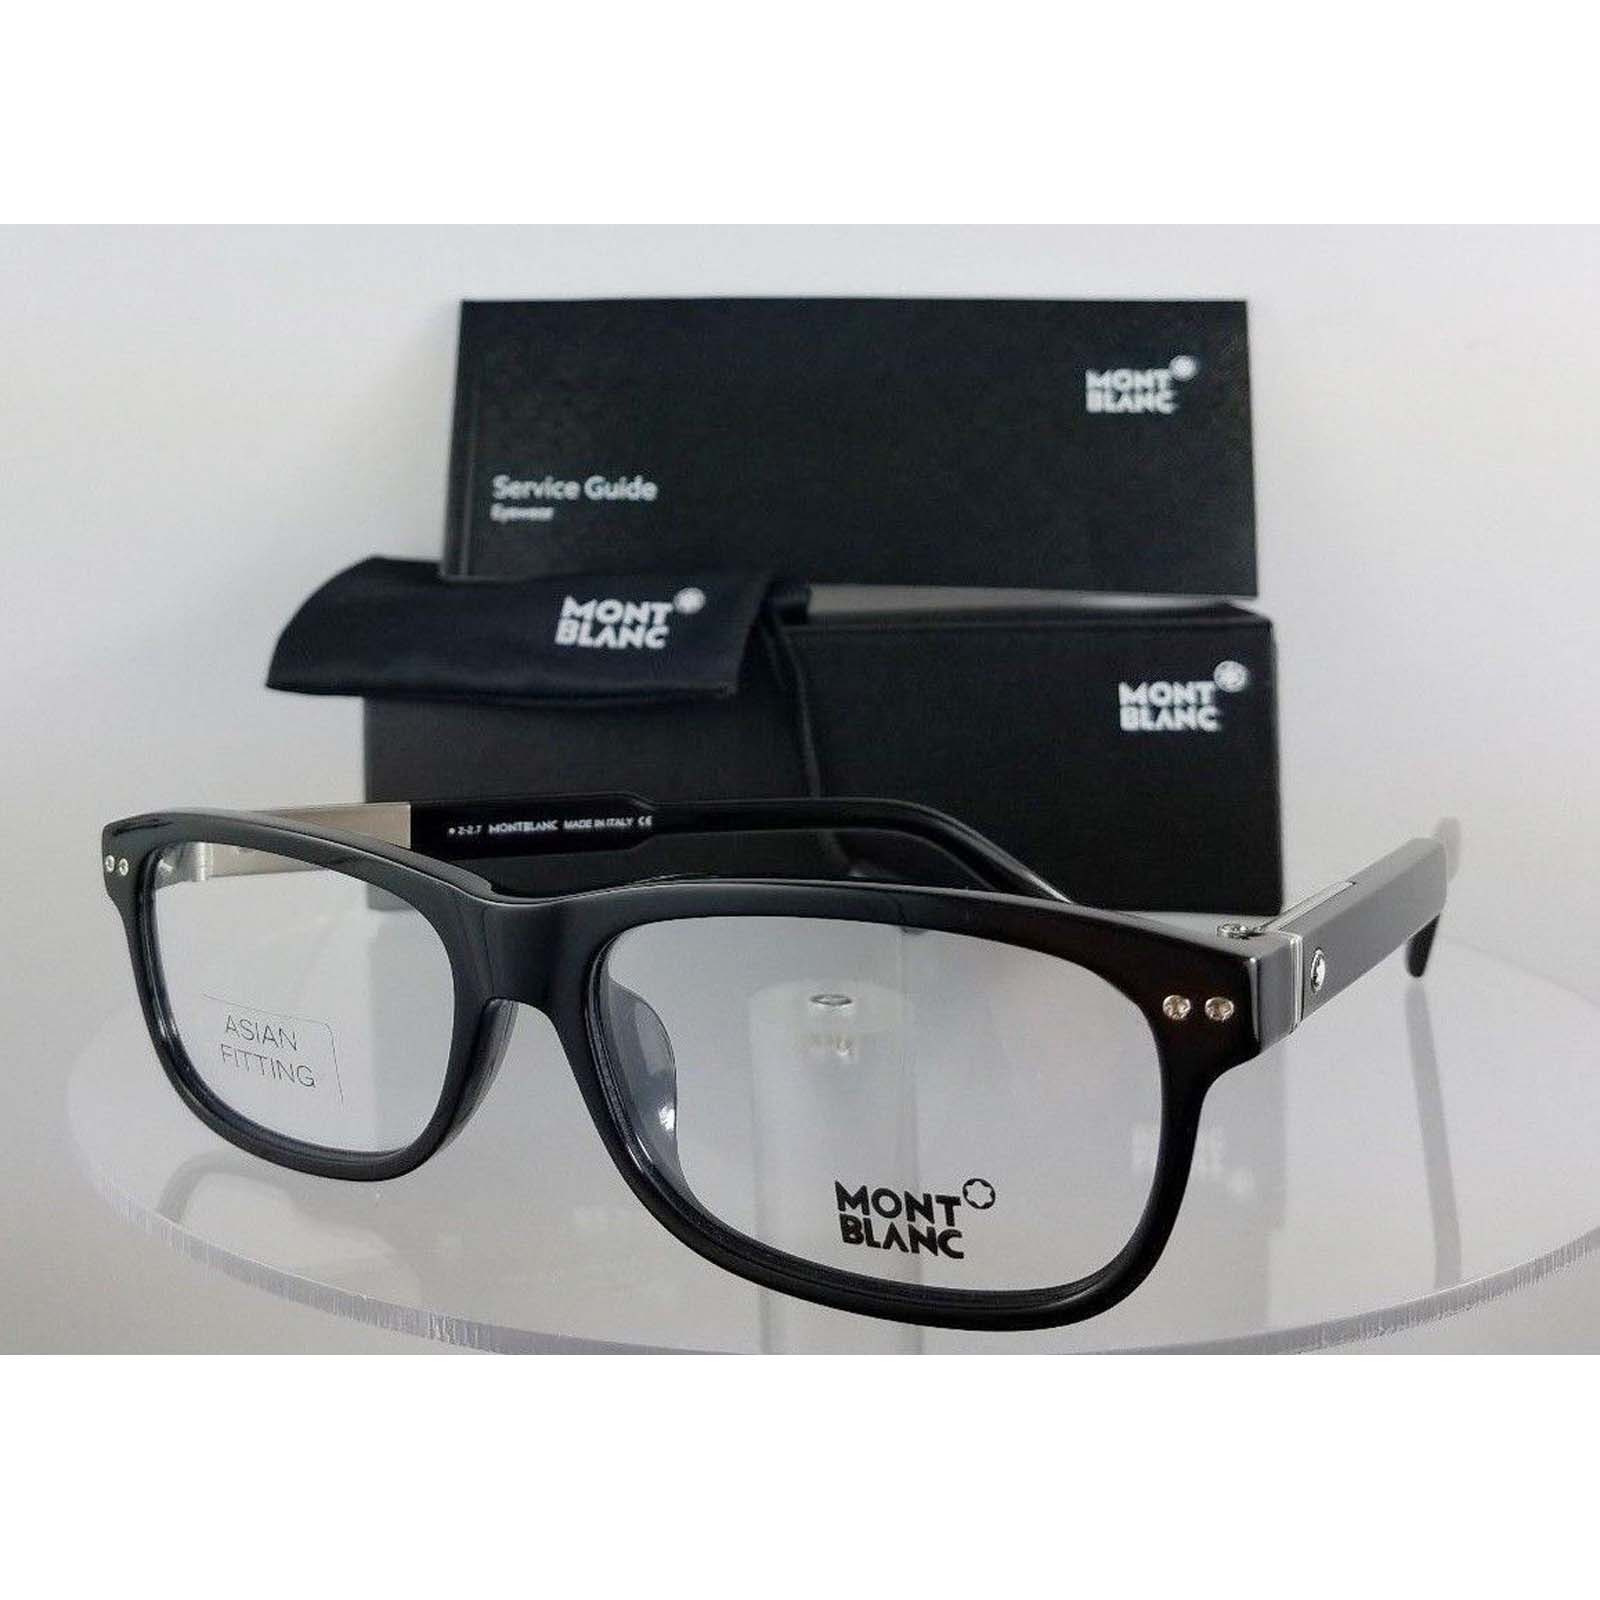 New Authentic Mont Blanc Eyeglasses MB 618-D 618 001 Black Frame 58-16-145 - See My Glasses